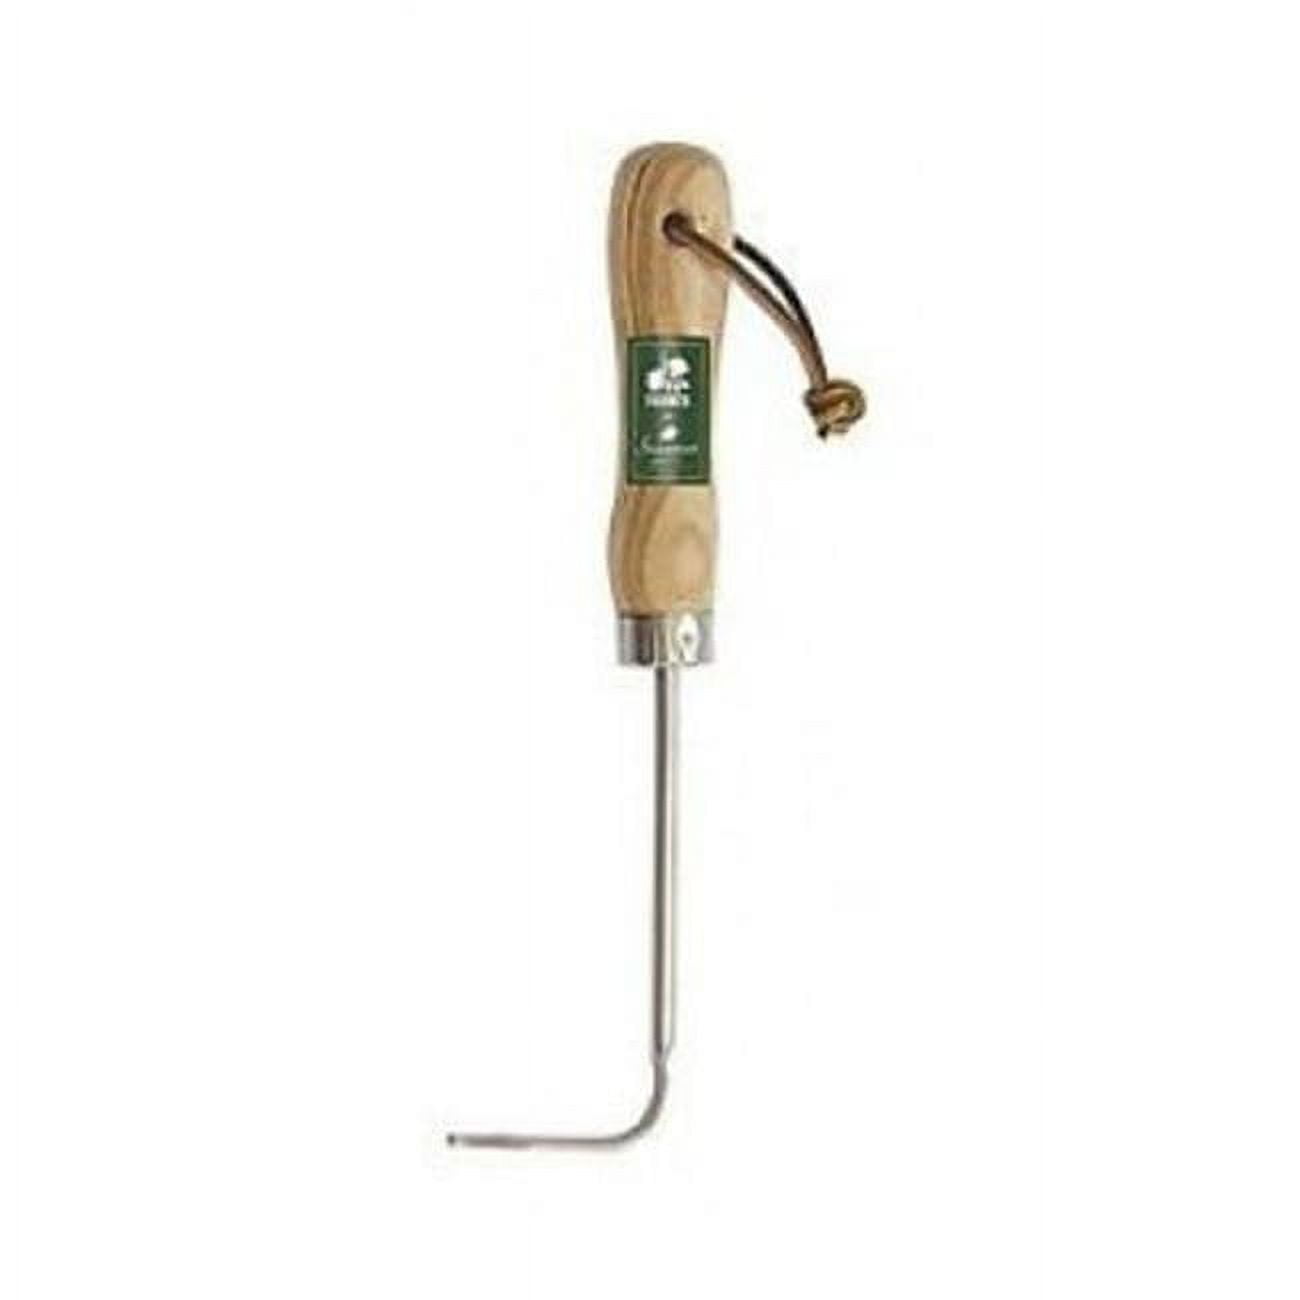 Bosmere R460 Haws Stainless Steel Hand Onion Hoe